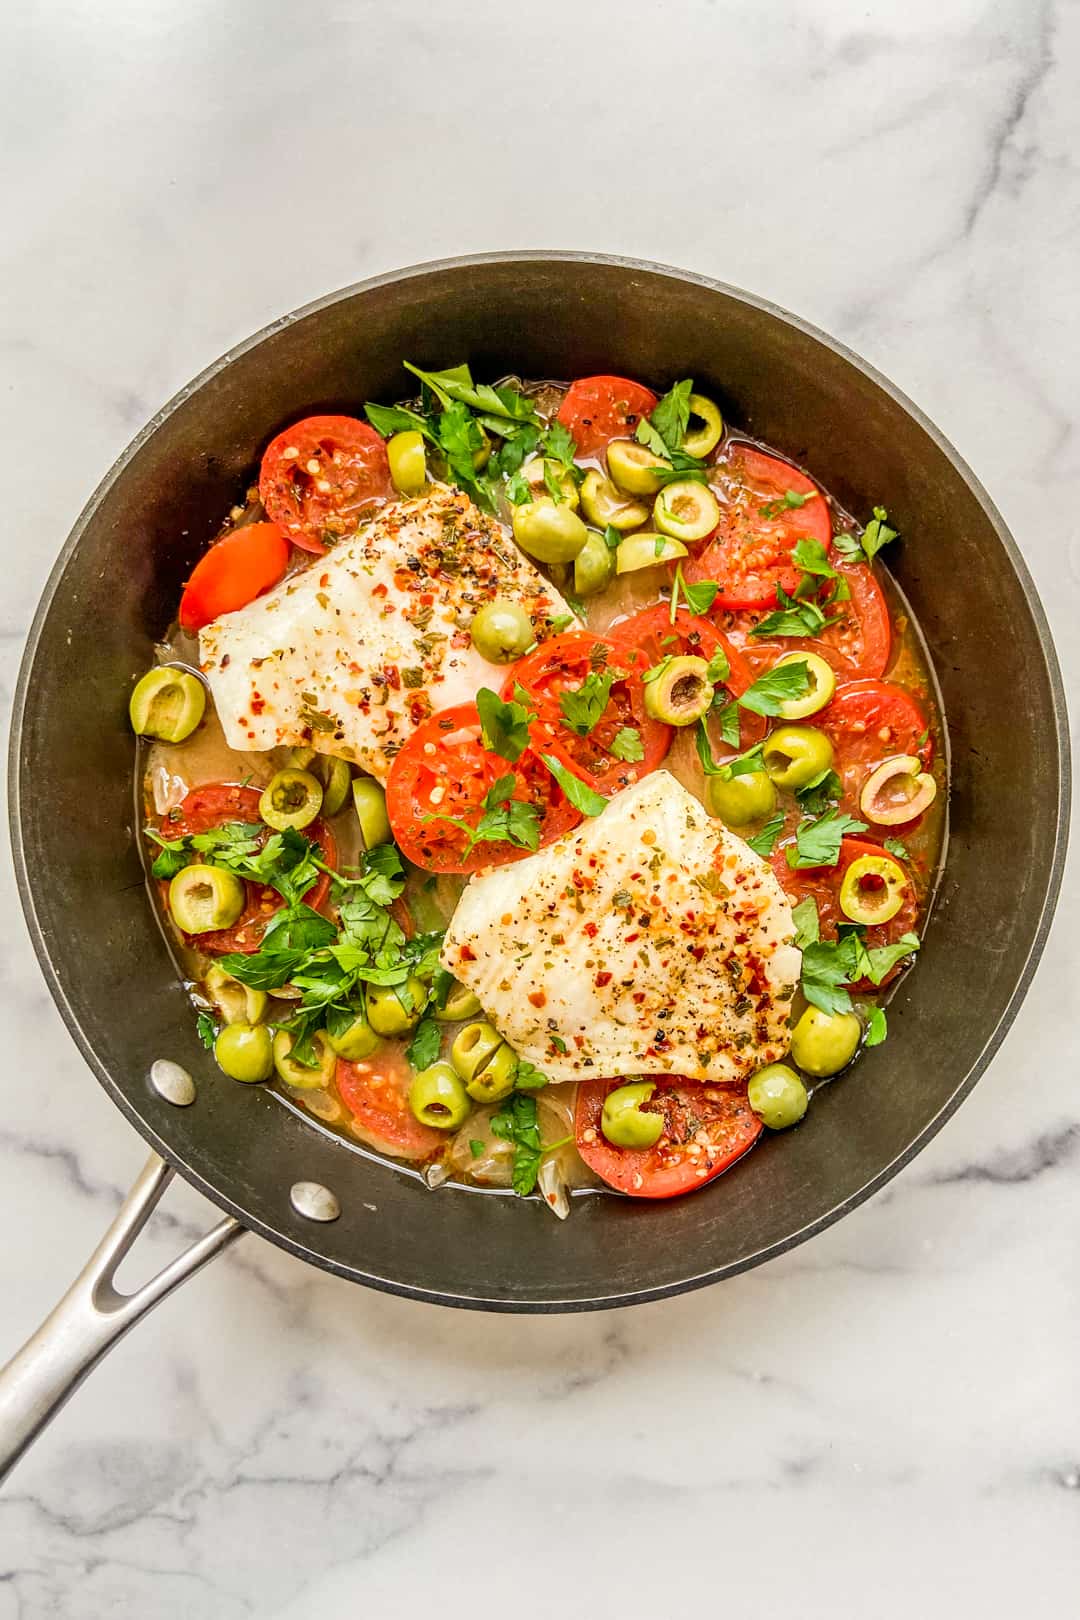 Poached sea bass with tomatoes and olives in a skillet.